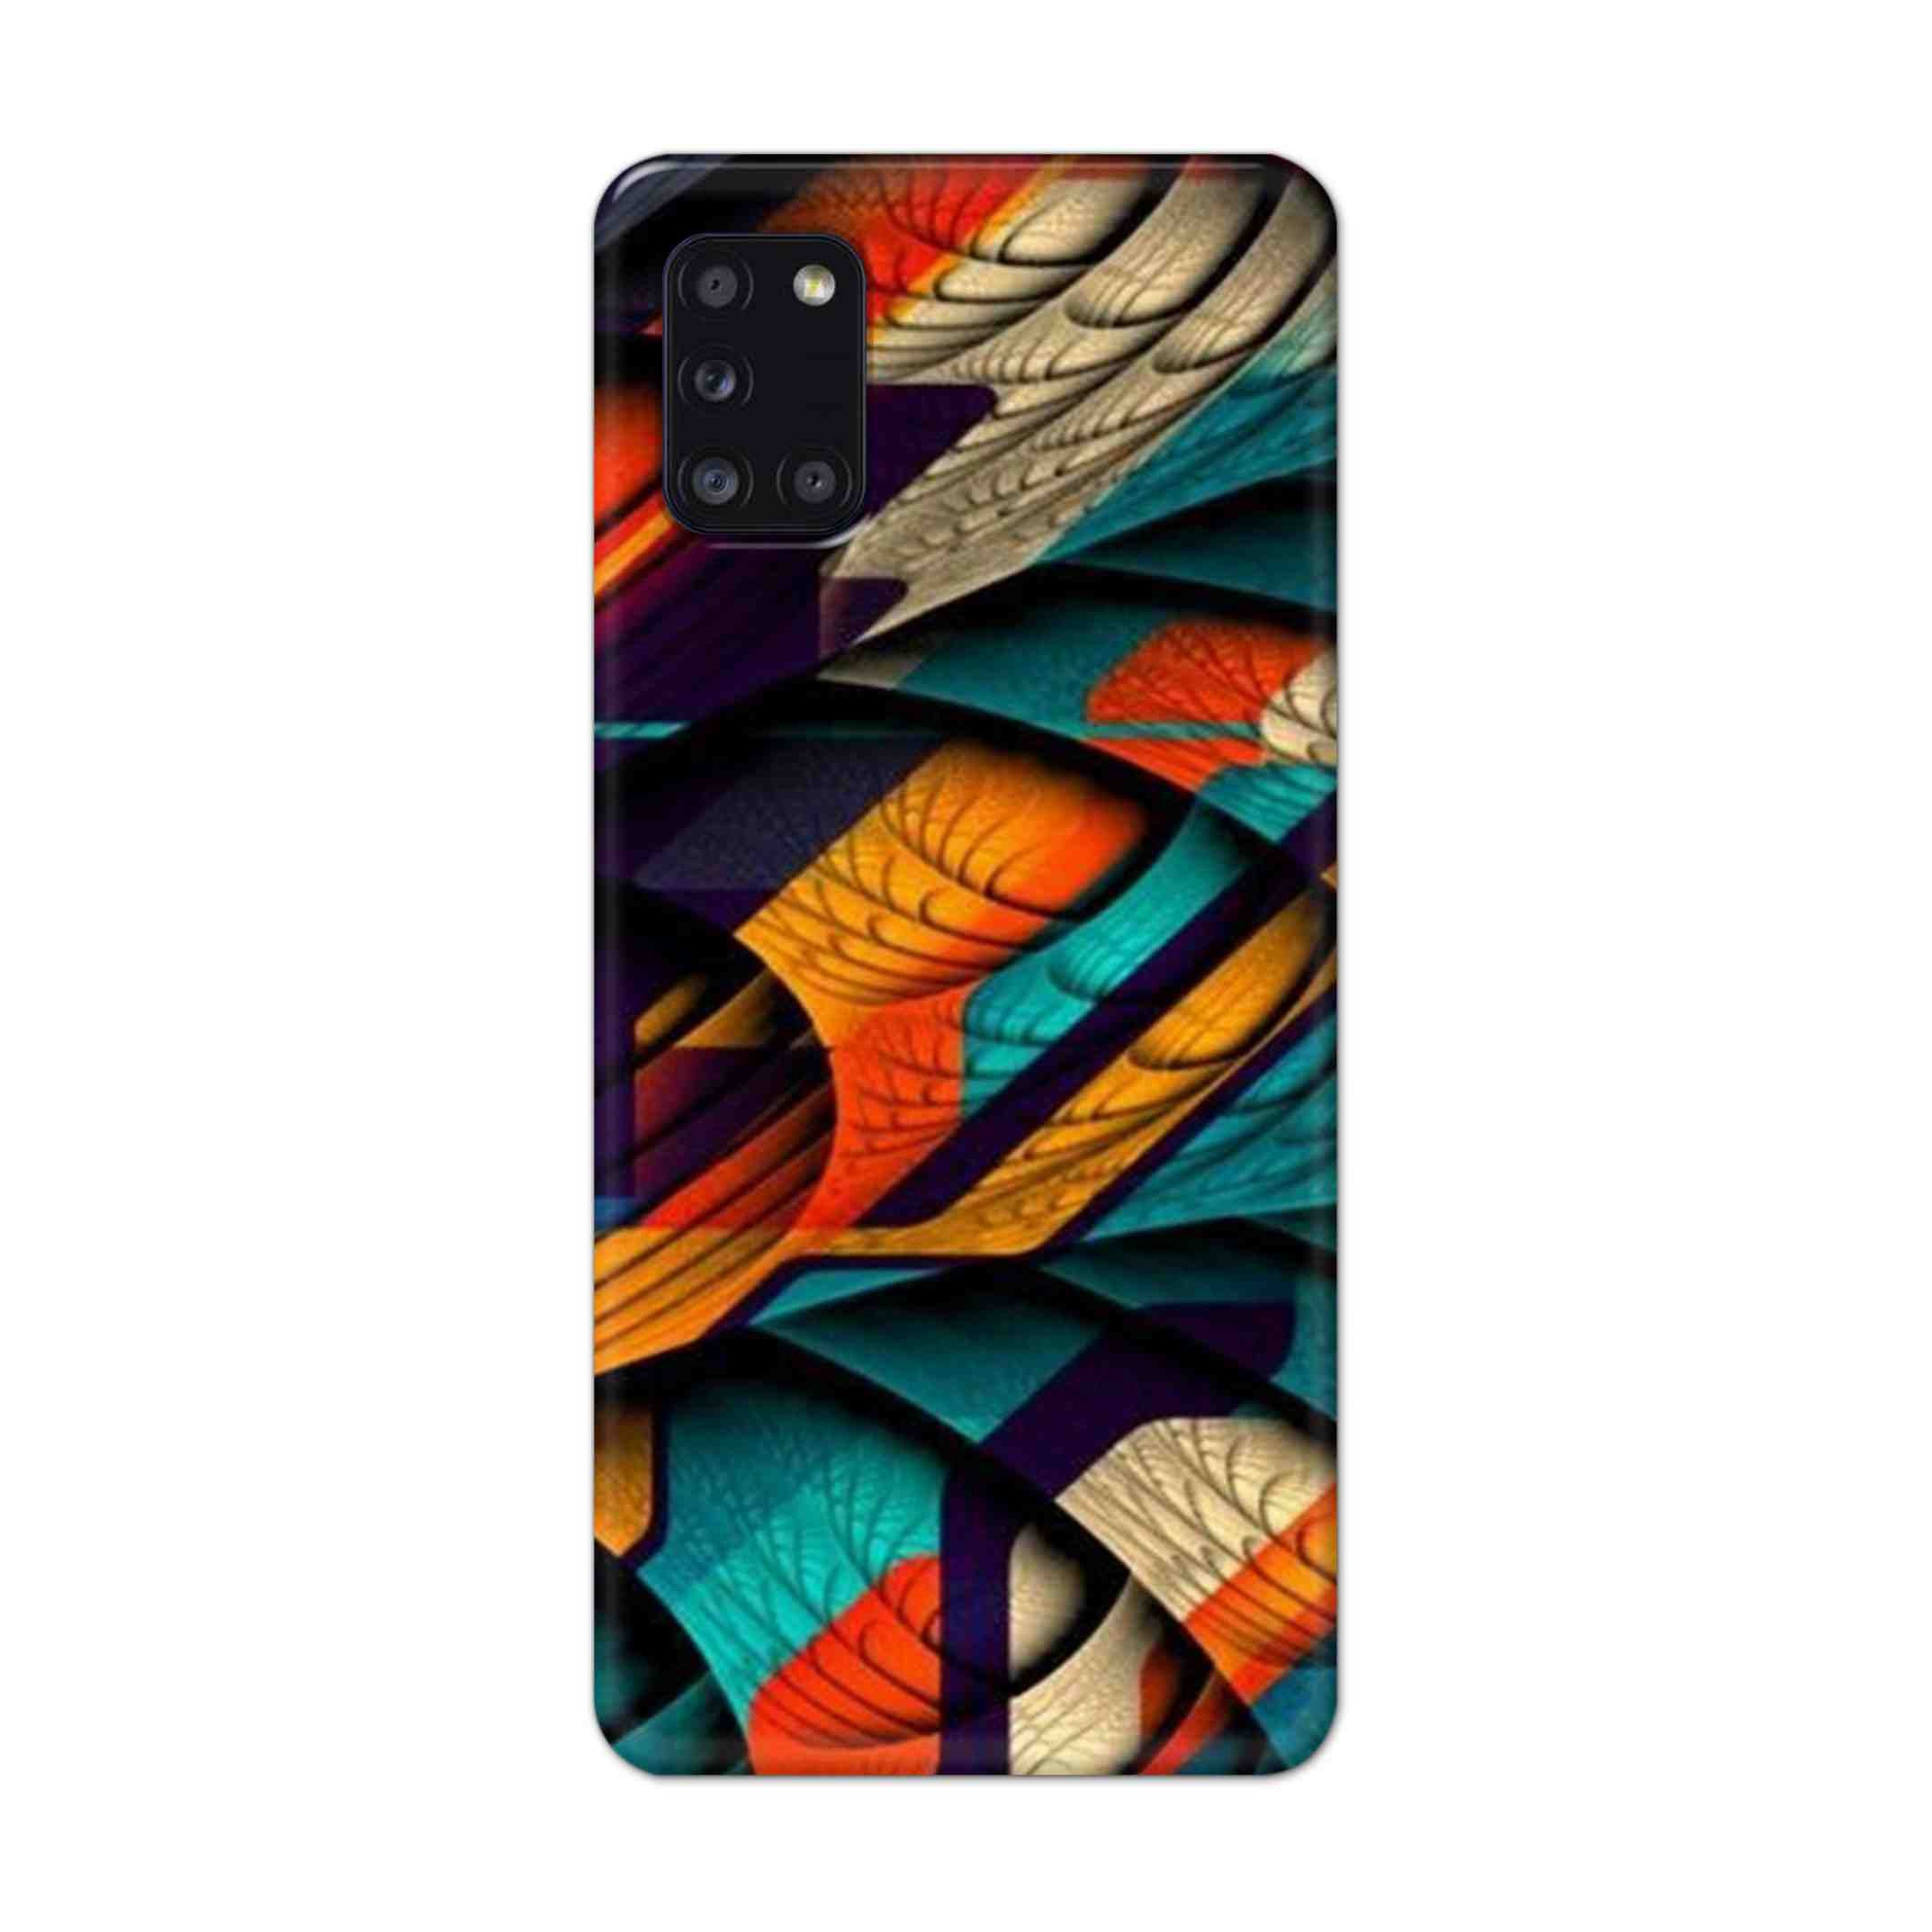 Buy Colour Abstract Hard Back Mobile Phone Case Cover For Samsung Galaxy A31 Online